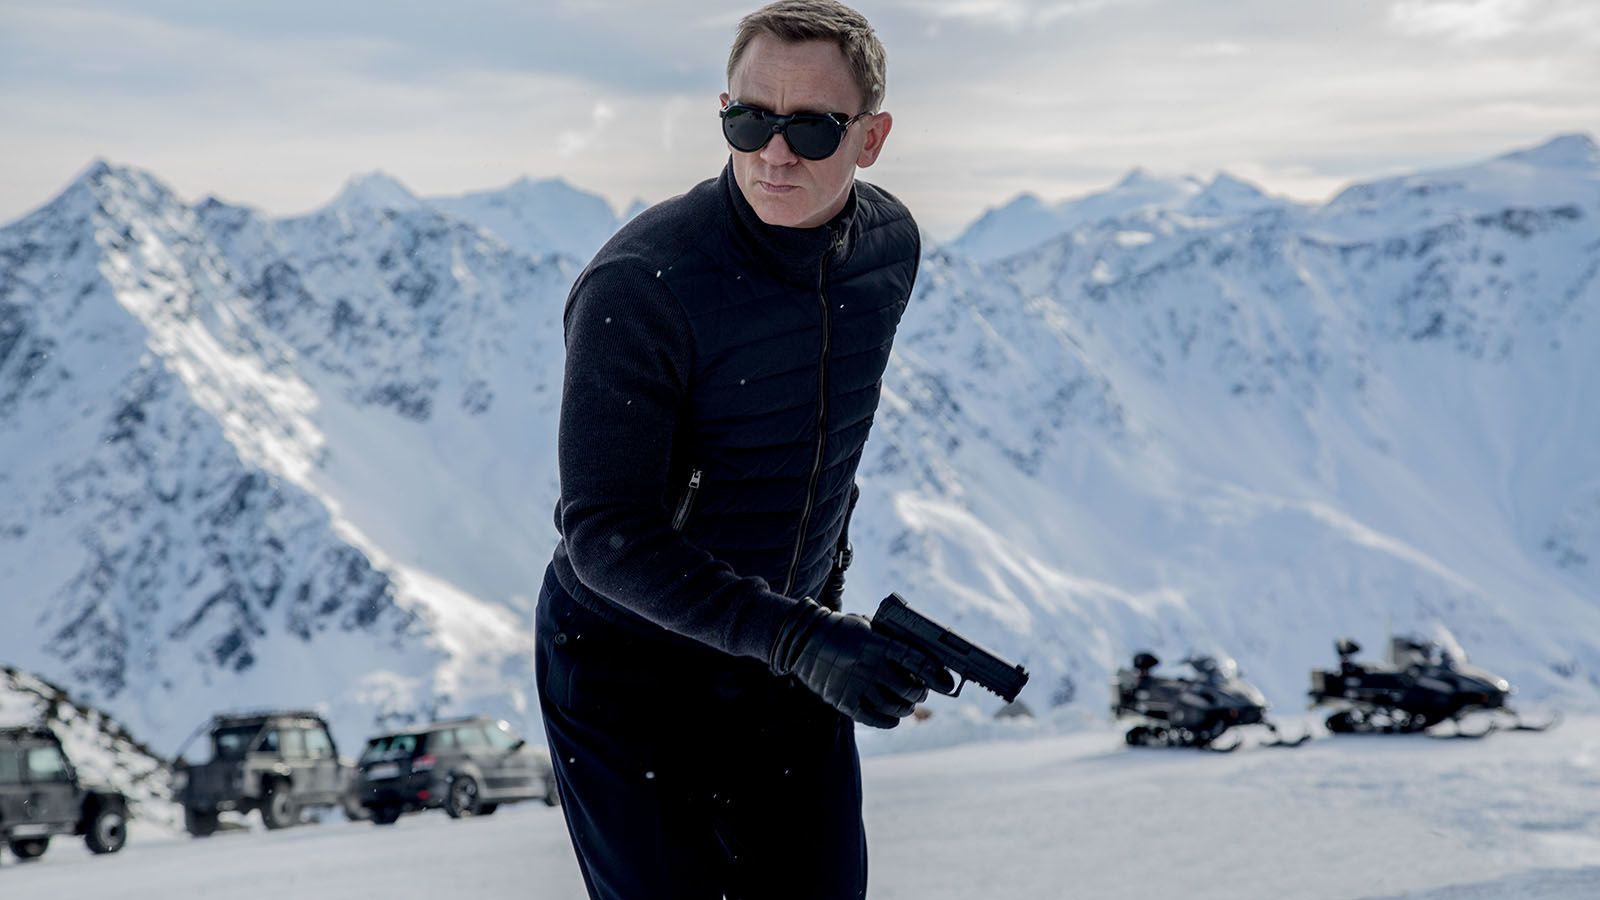 A view to a sell: will Spectre's brands get the traditional Bond